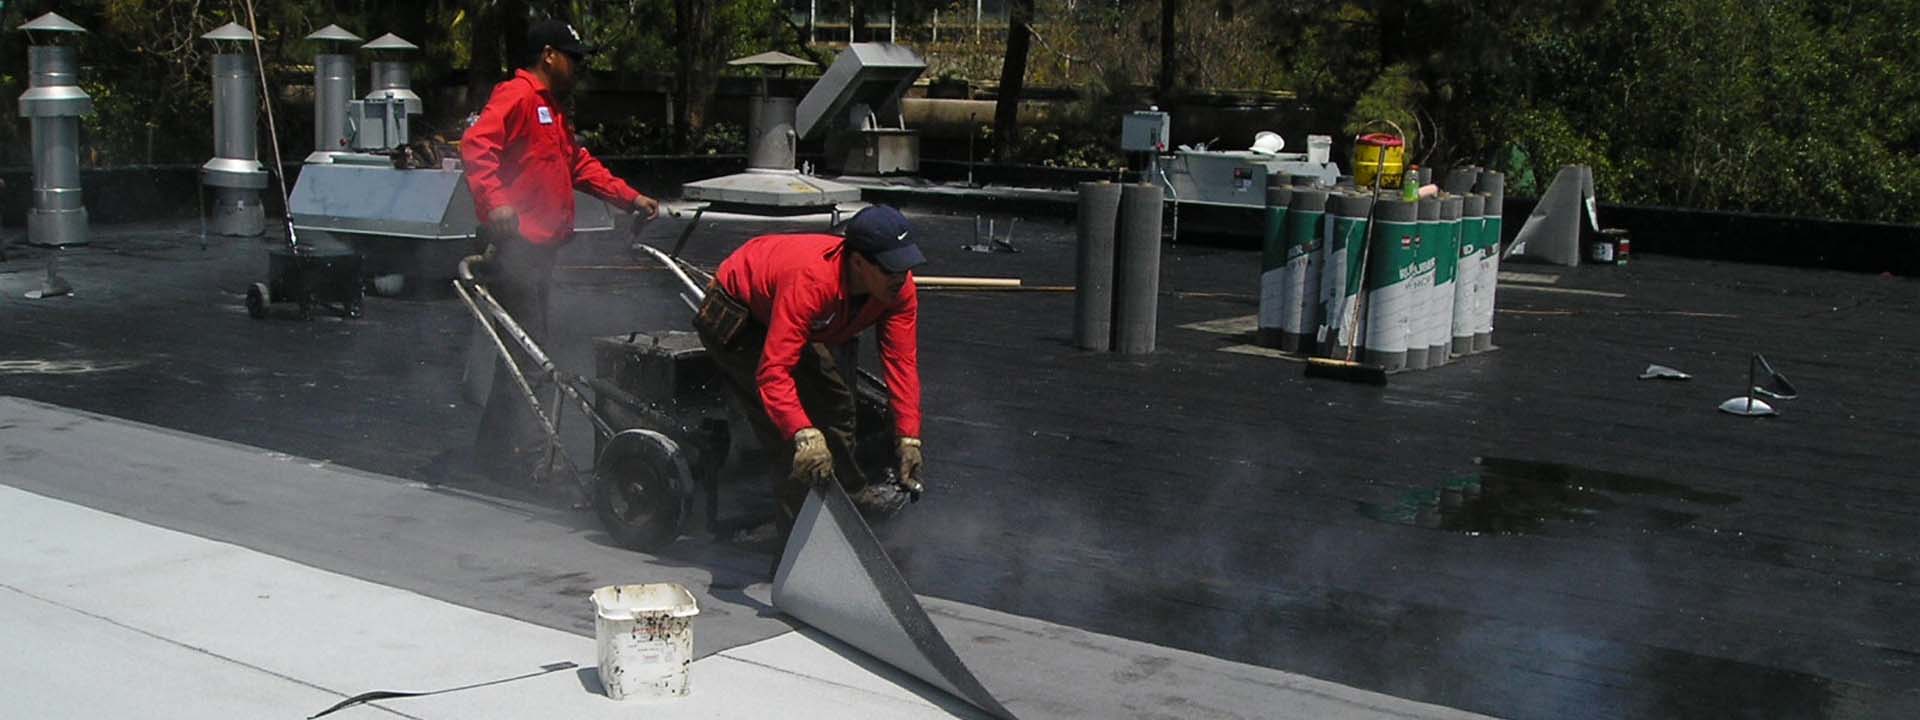 Commercial Roofing Systems - Built Up Roofing